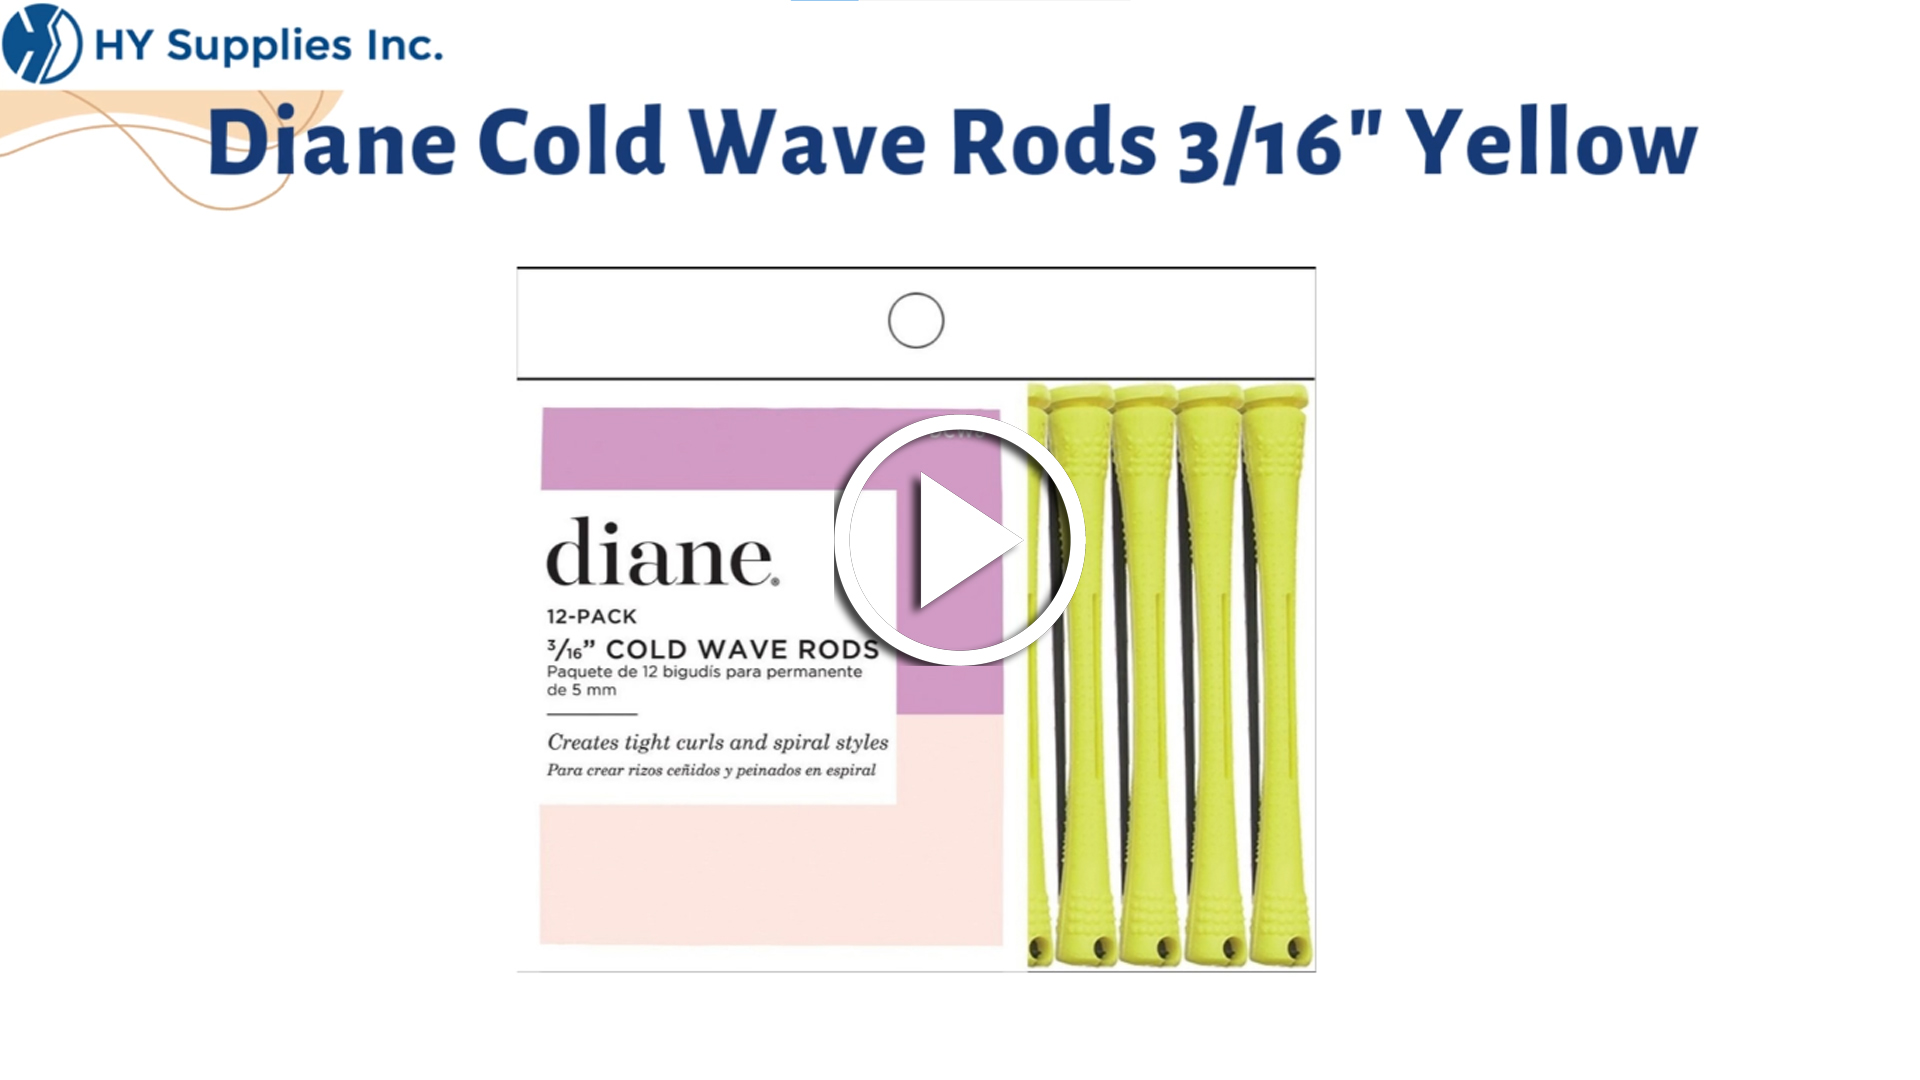 Diane Cold Wave Rods 3/16" Yellow 